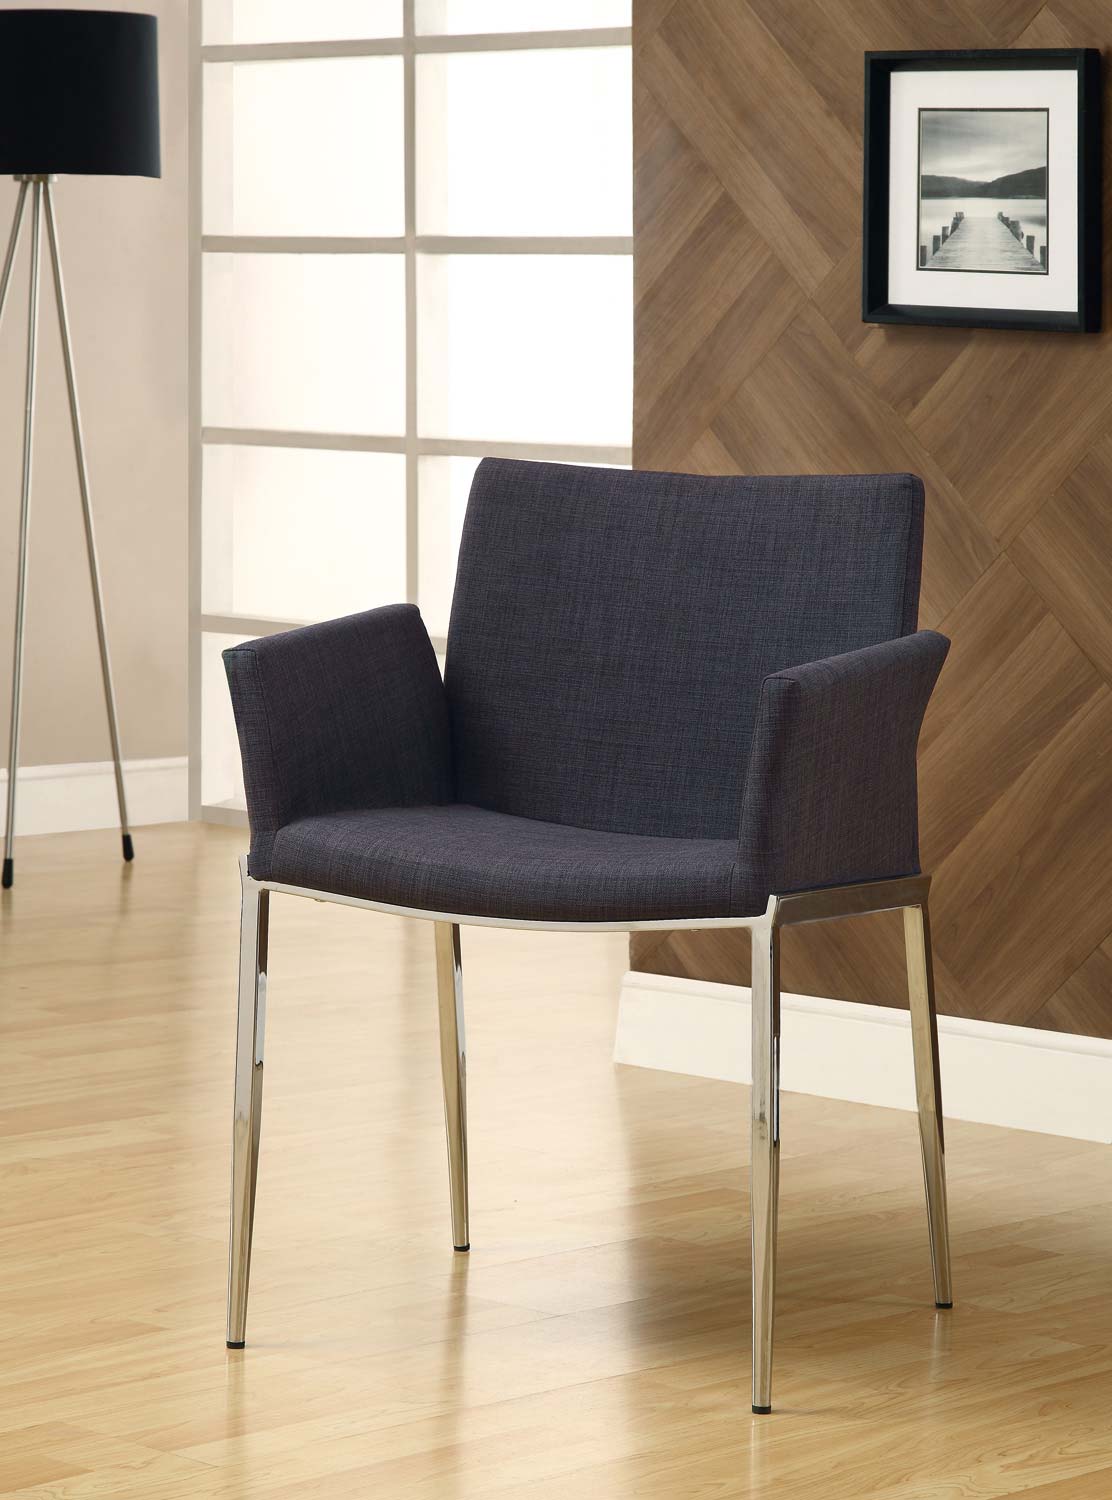 Coaster Mix & Match Dining Chair - Charcoal